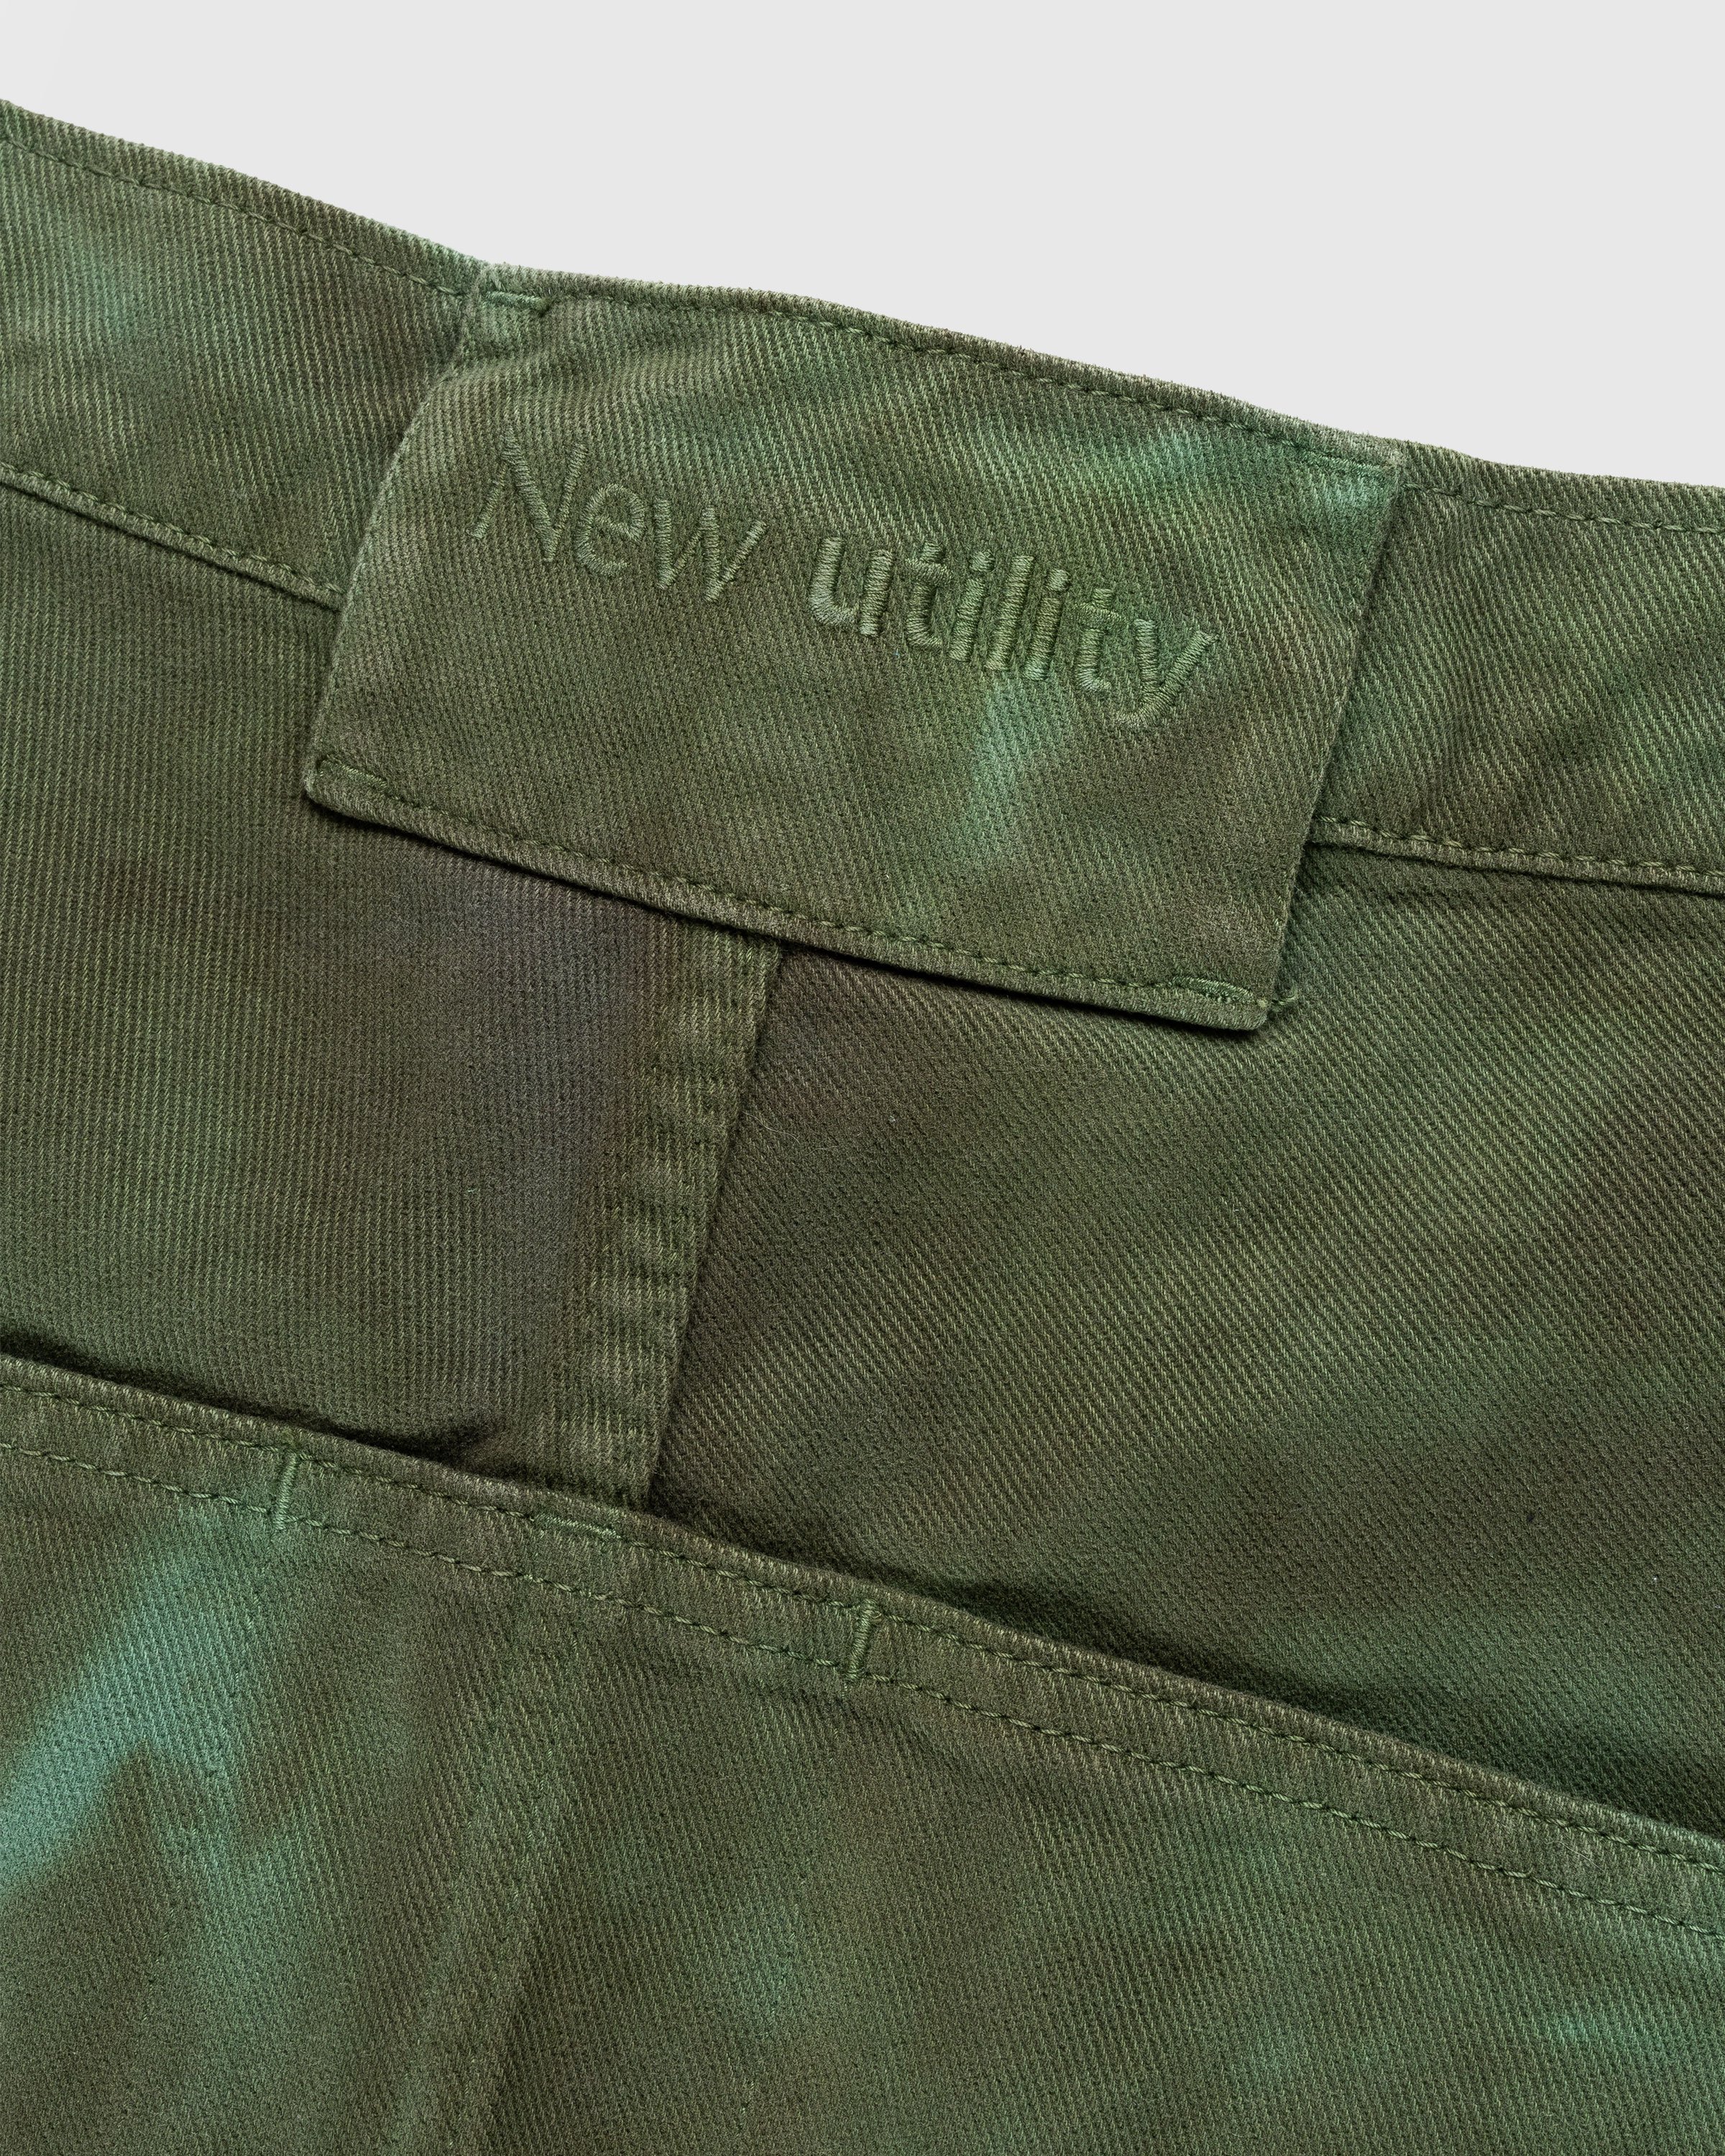 AFFXWRKS - Crease-Dye Duty Pant Green - Clothing - Green - Image 4